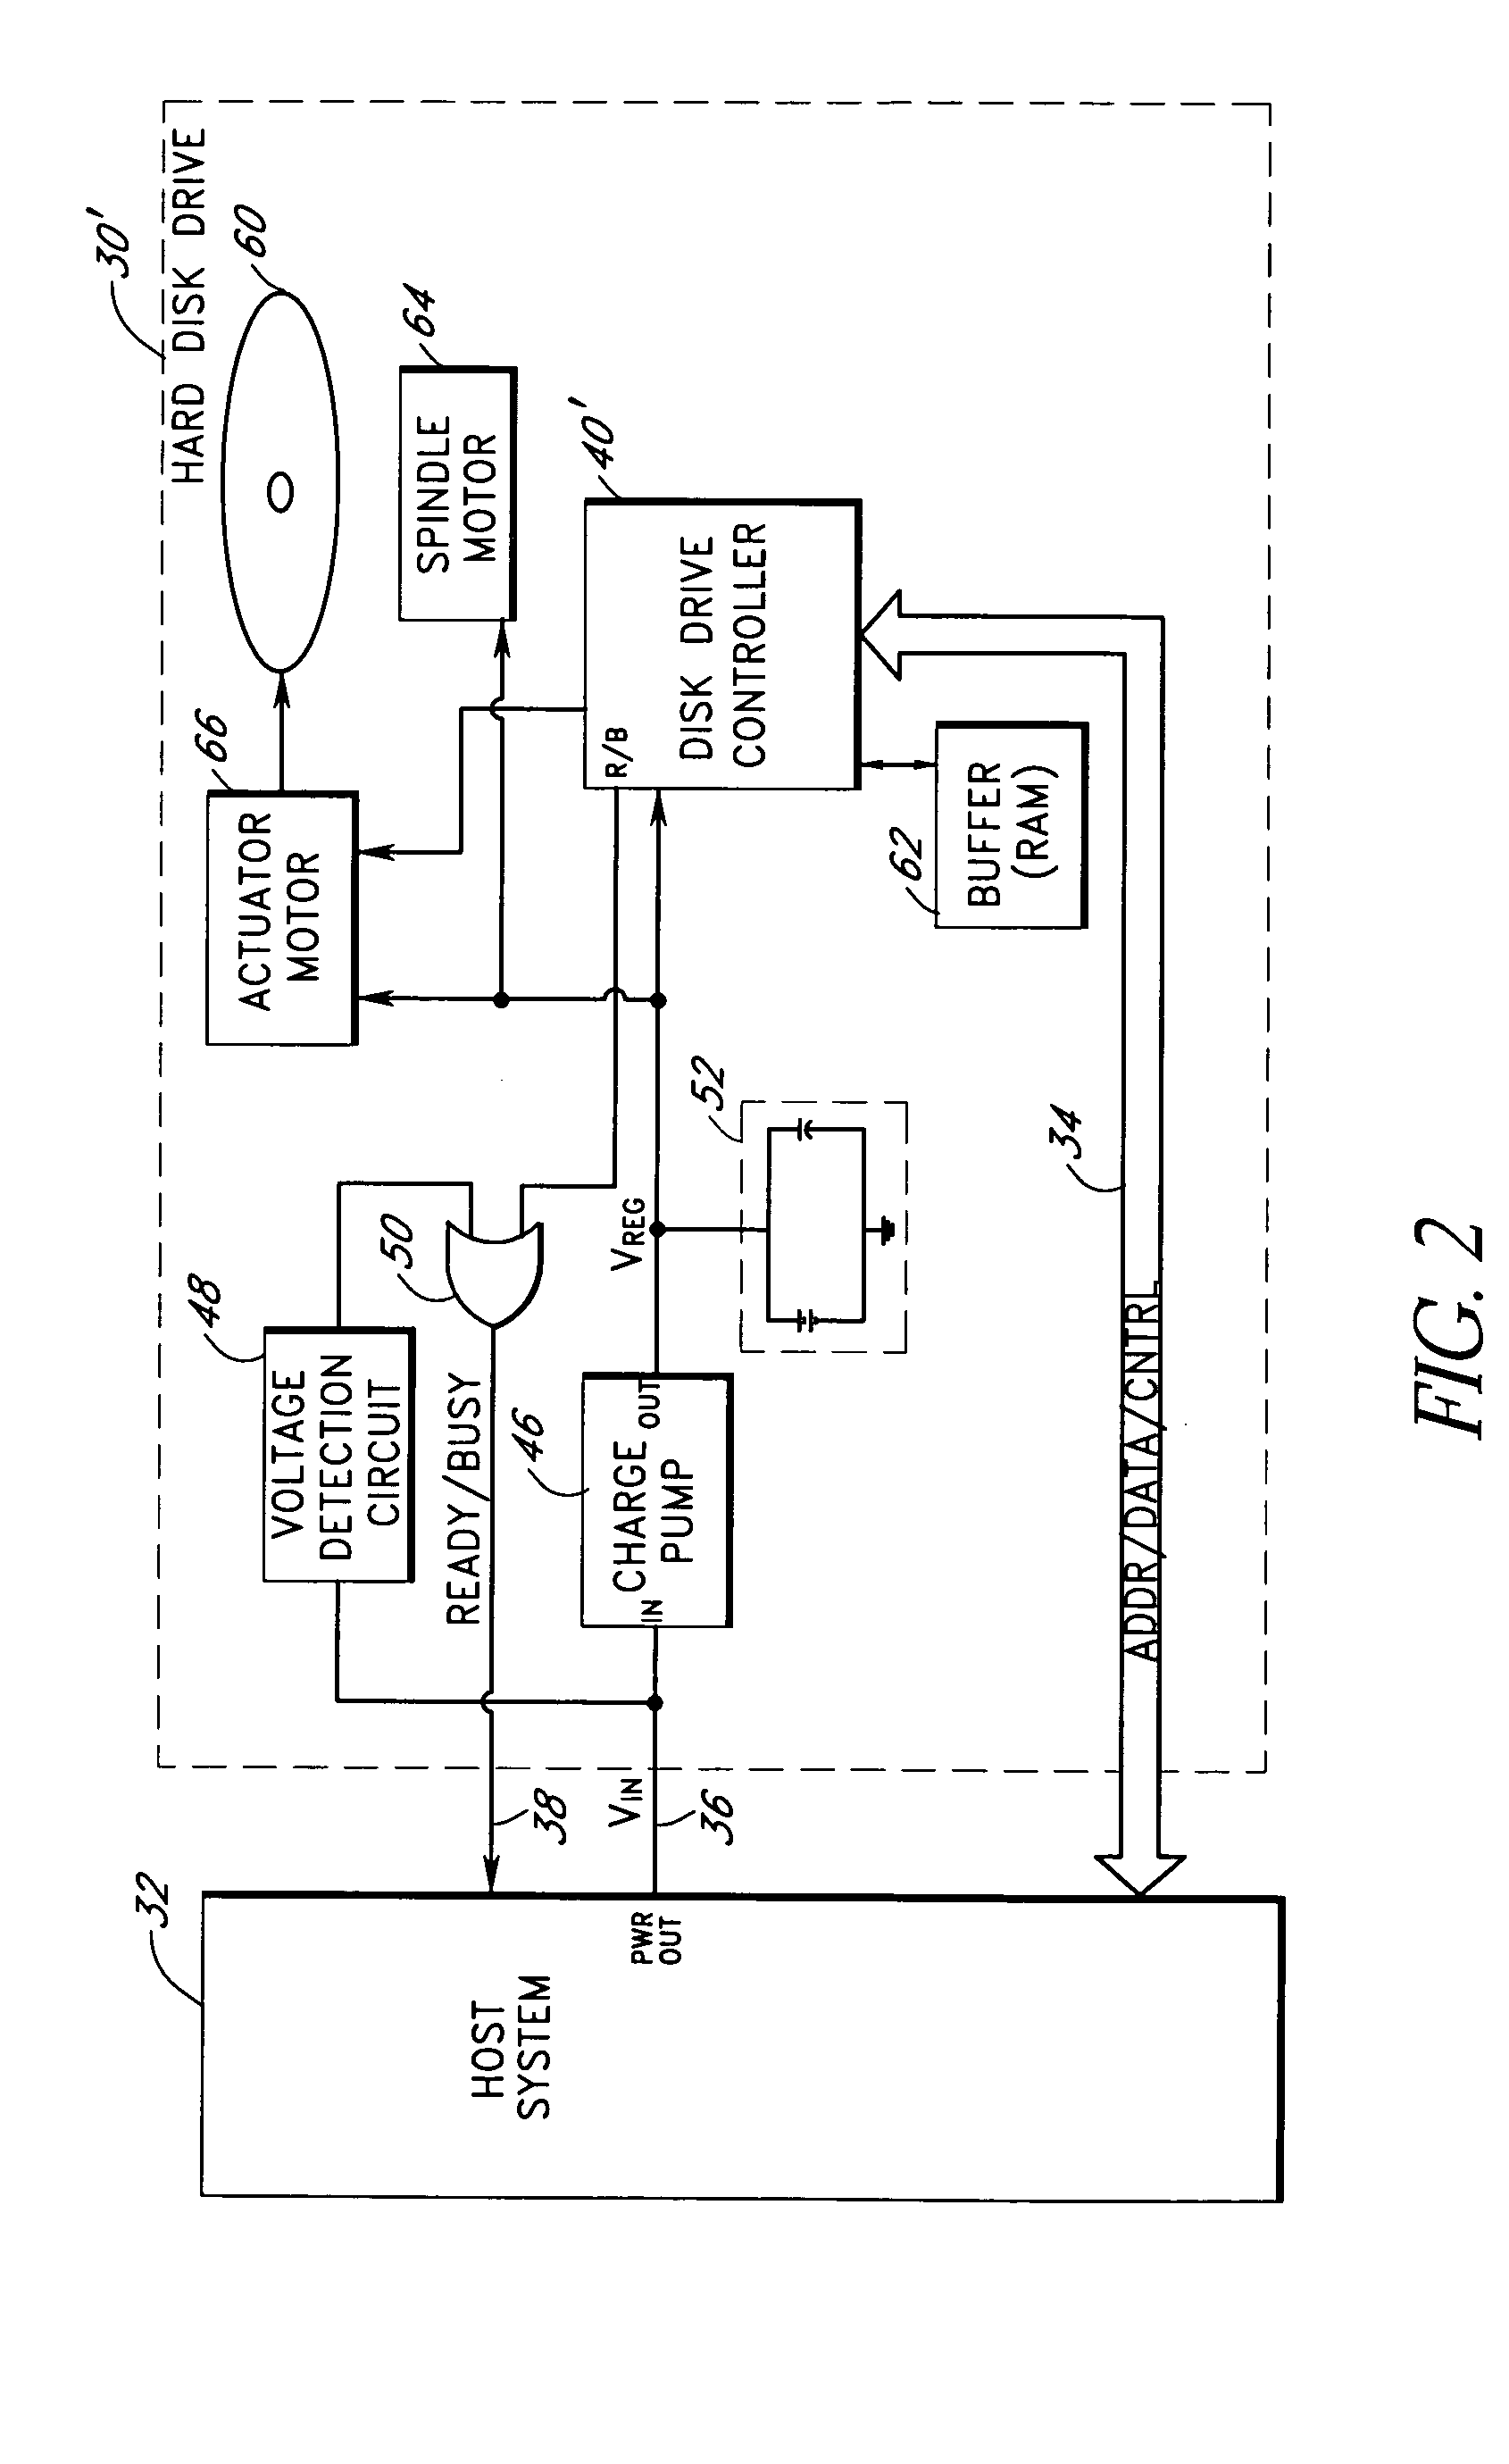 Storage subsystem with embedded circuit for protecting against anomalies in power signal from host